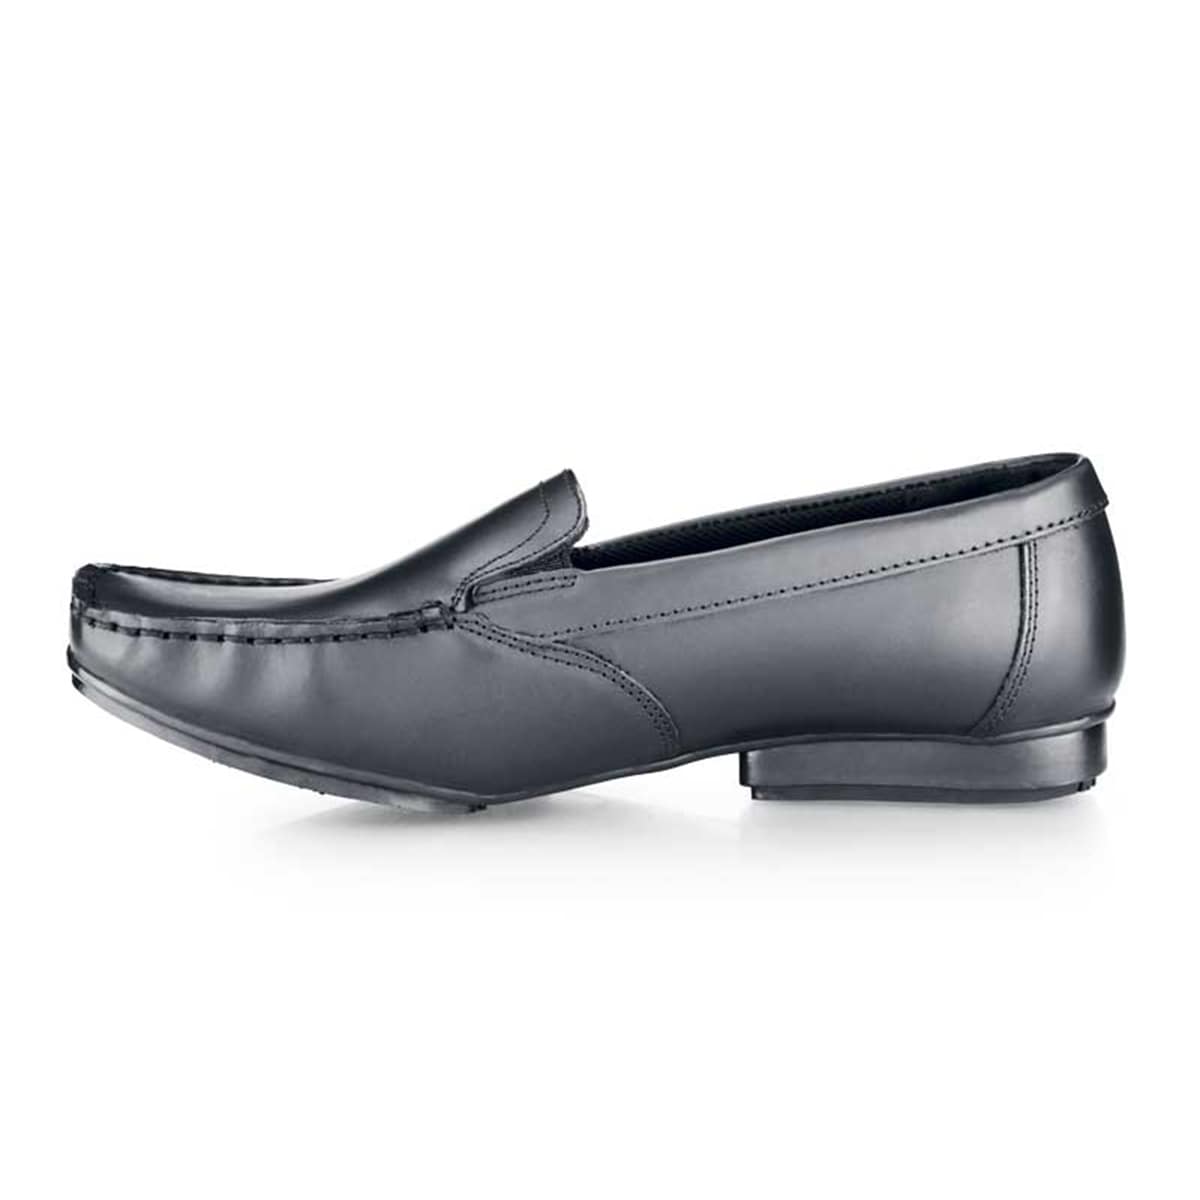 The Jenni from Shoes For Crews is a slip-on dress shoe, slip-resistant and designed to provide comfort throughout the working day, seen from the left.